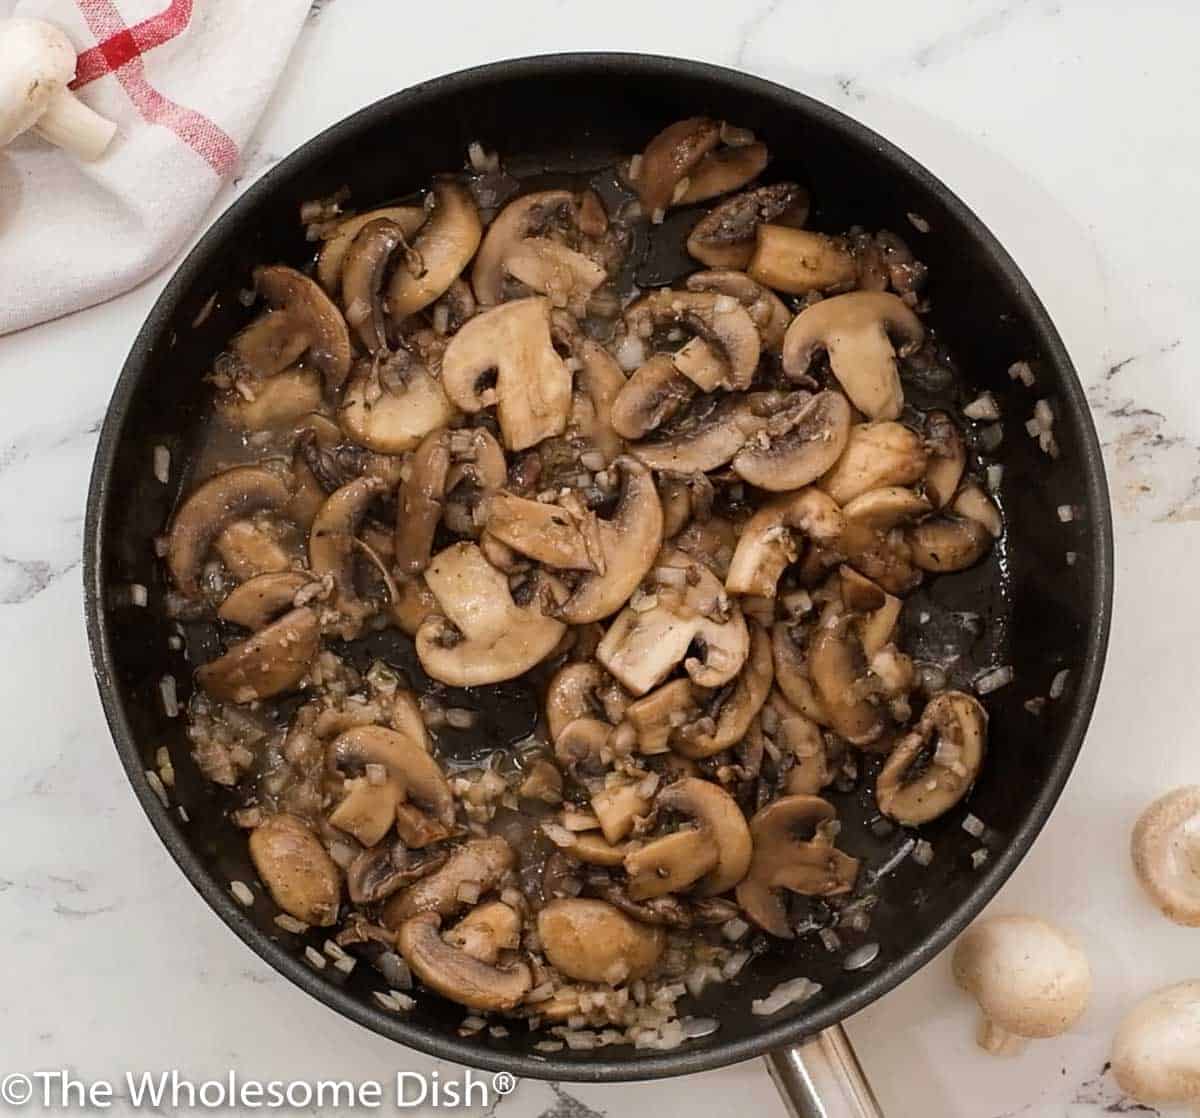 Skillet full of cooked mushroom and onion sauce for spaghetti.